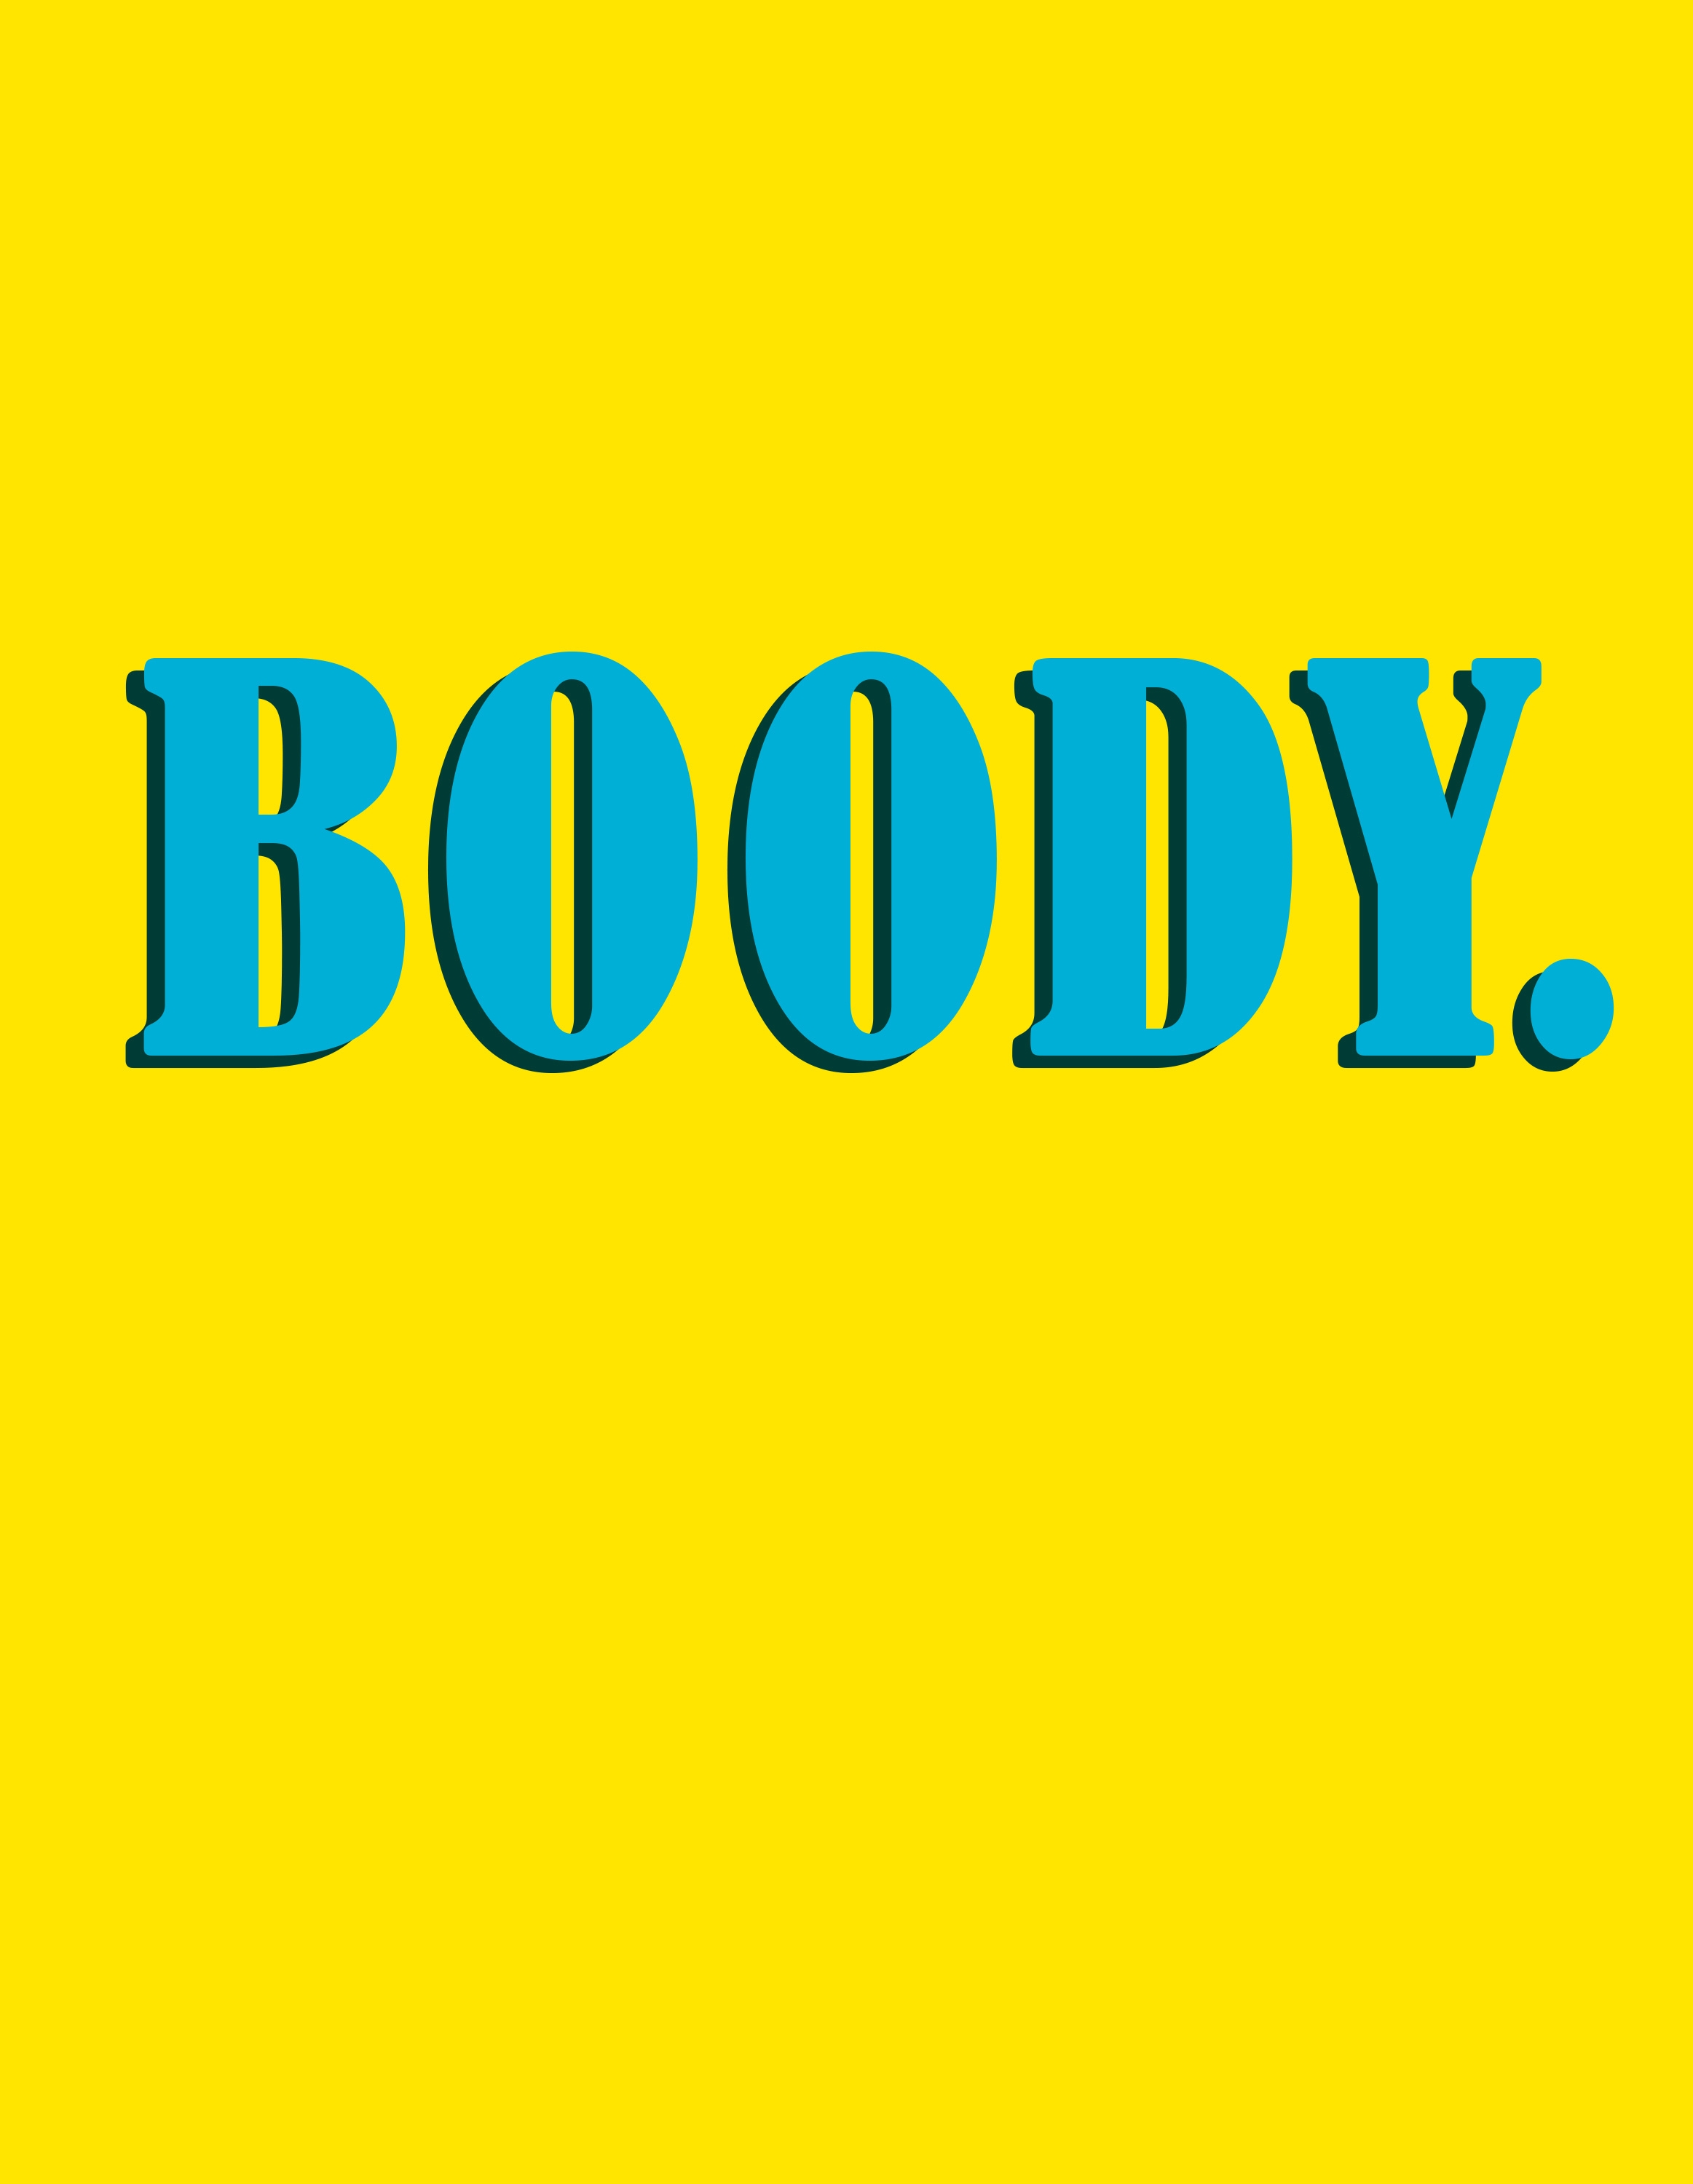 Read online Boody. comic -  Issue # TPB - 2